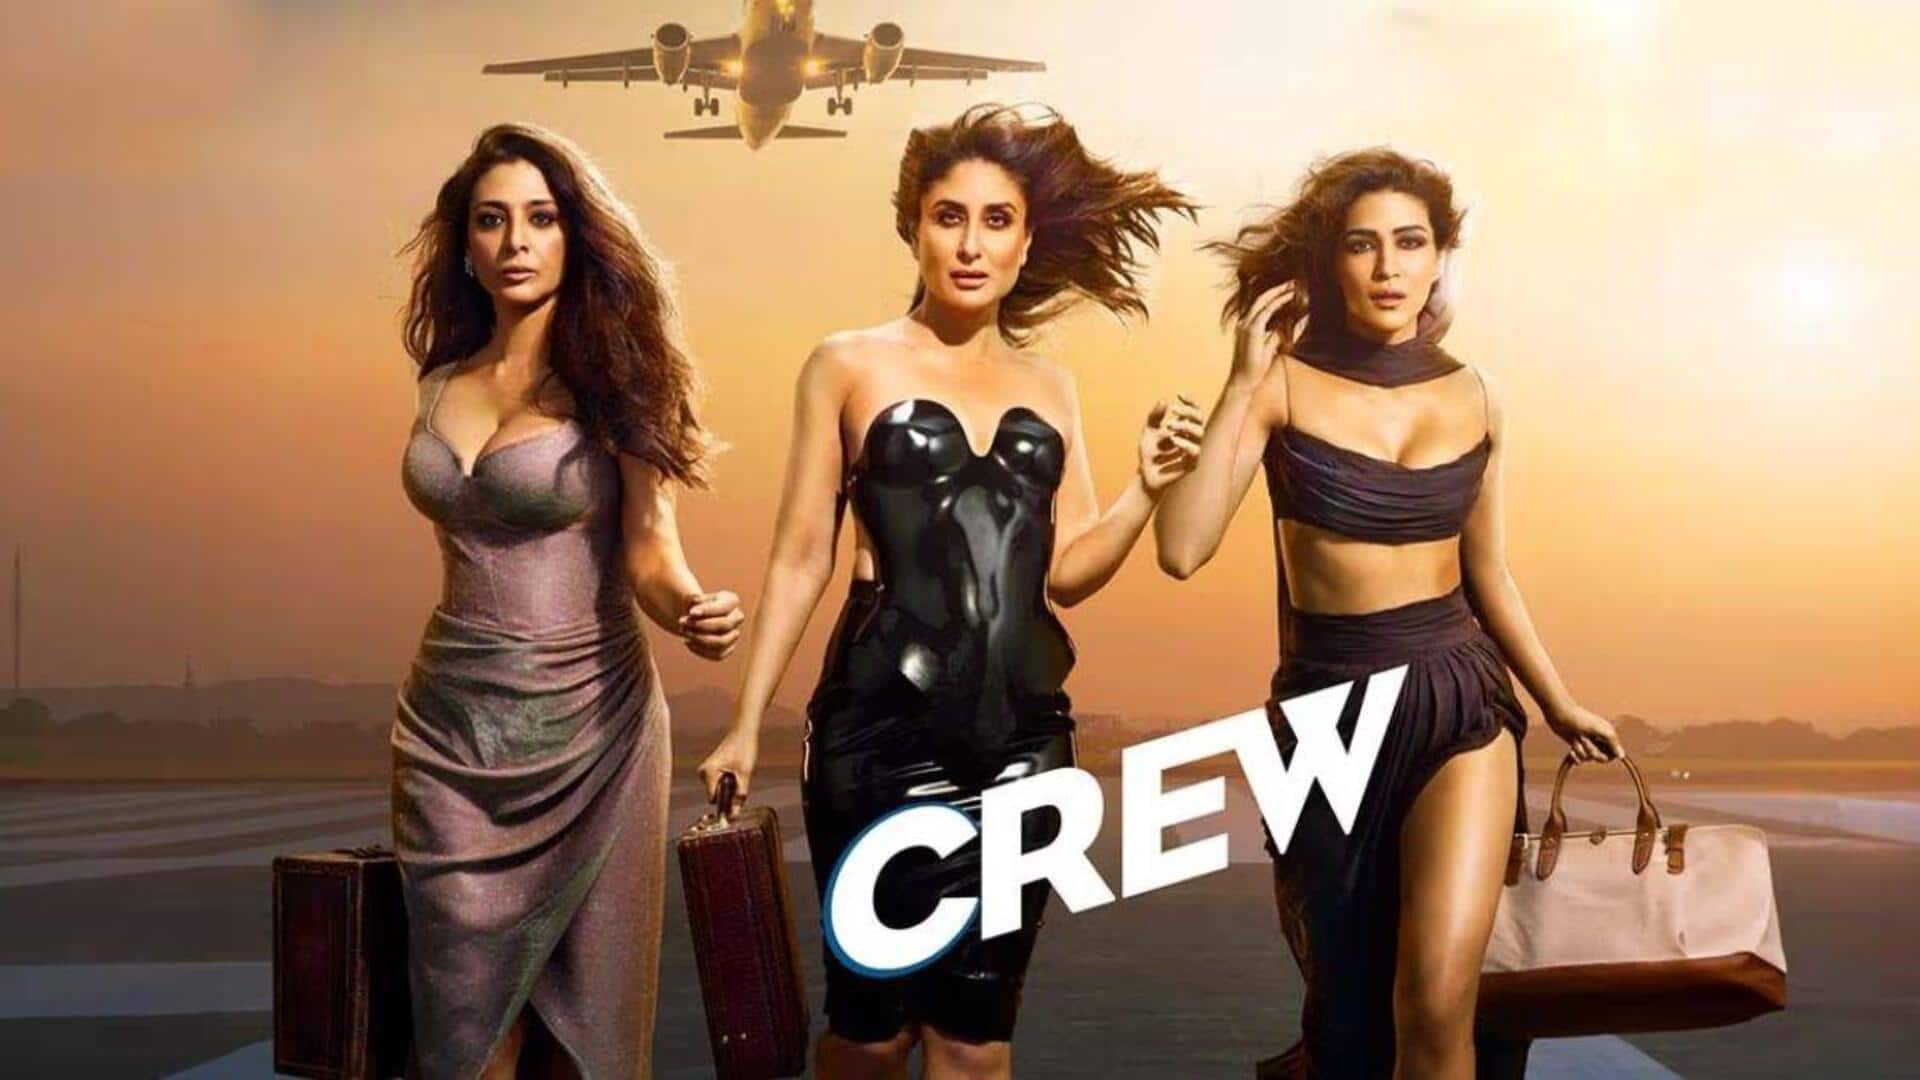 Box office buzz: 'Crew' to take off with panache